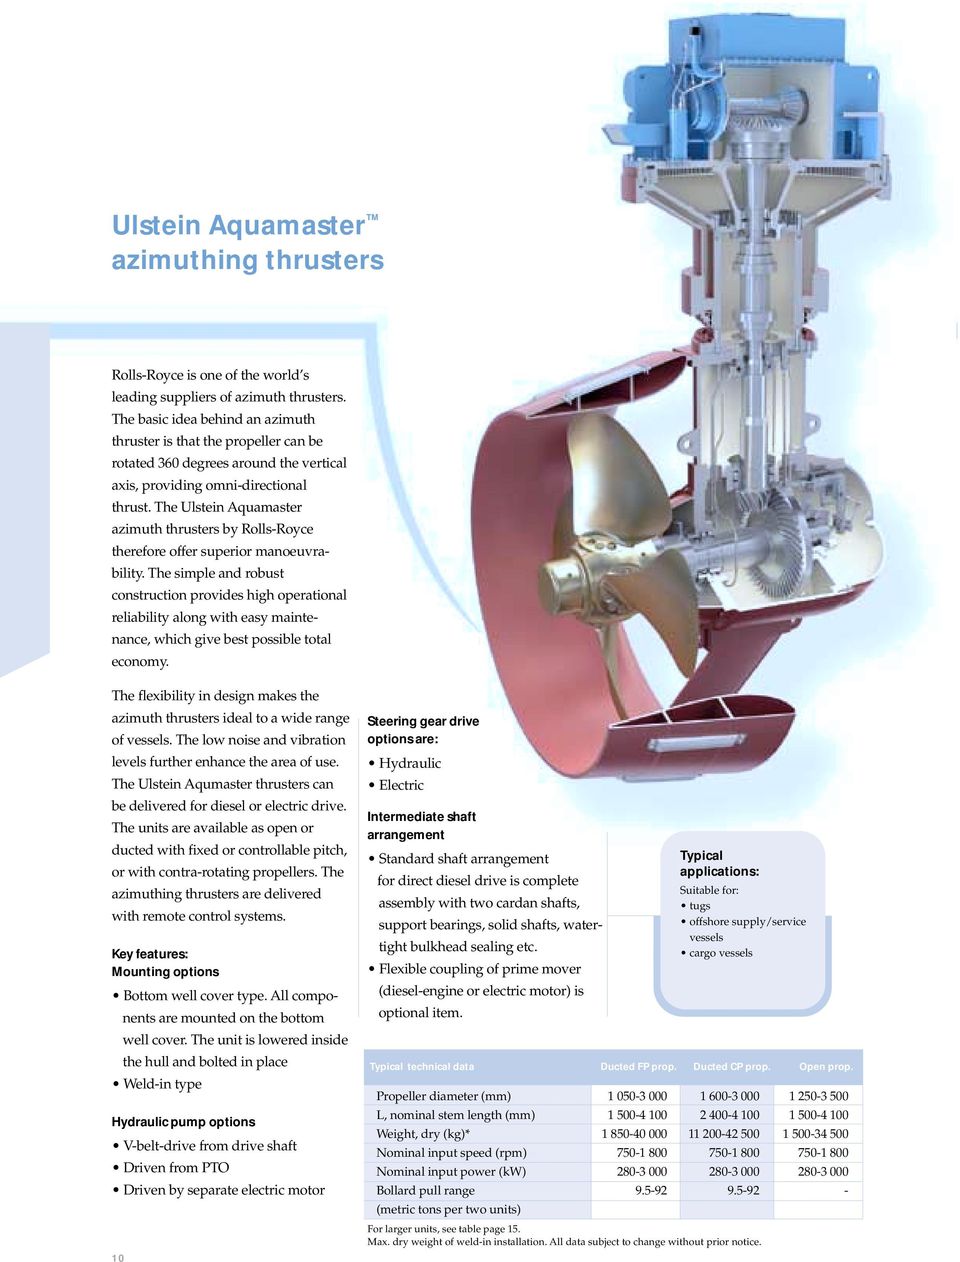 The Ulstein Aquamaster azimuth thrusters by Rolls-Royce therefore offer superior manoeuvrability.